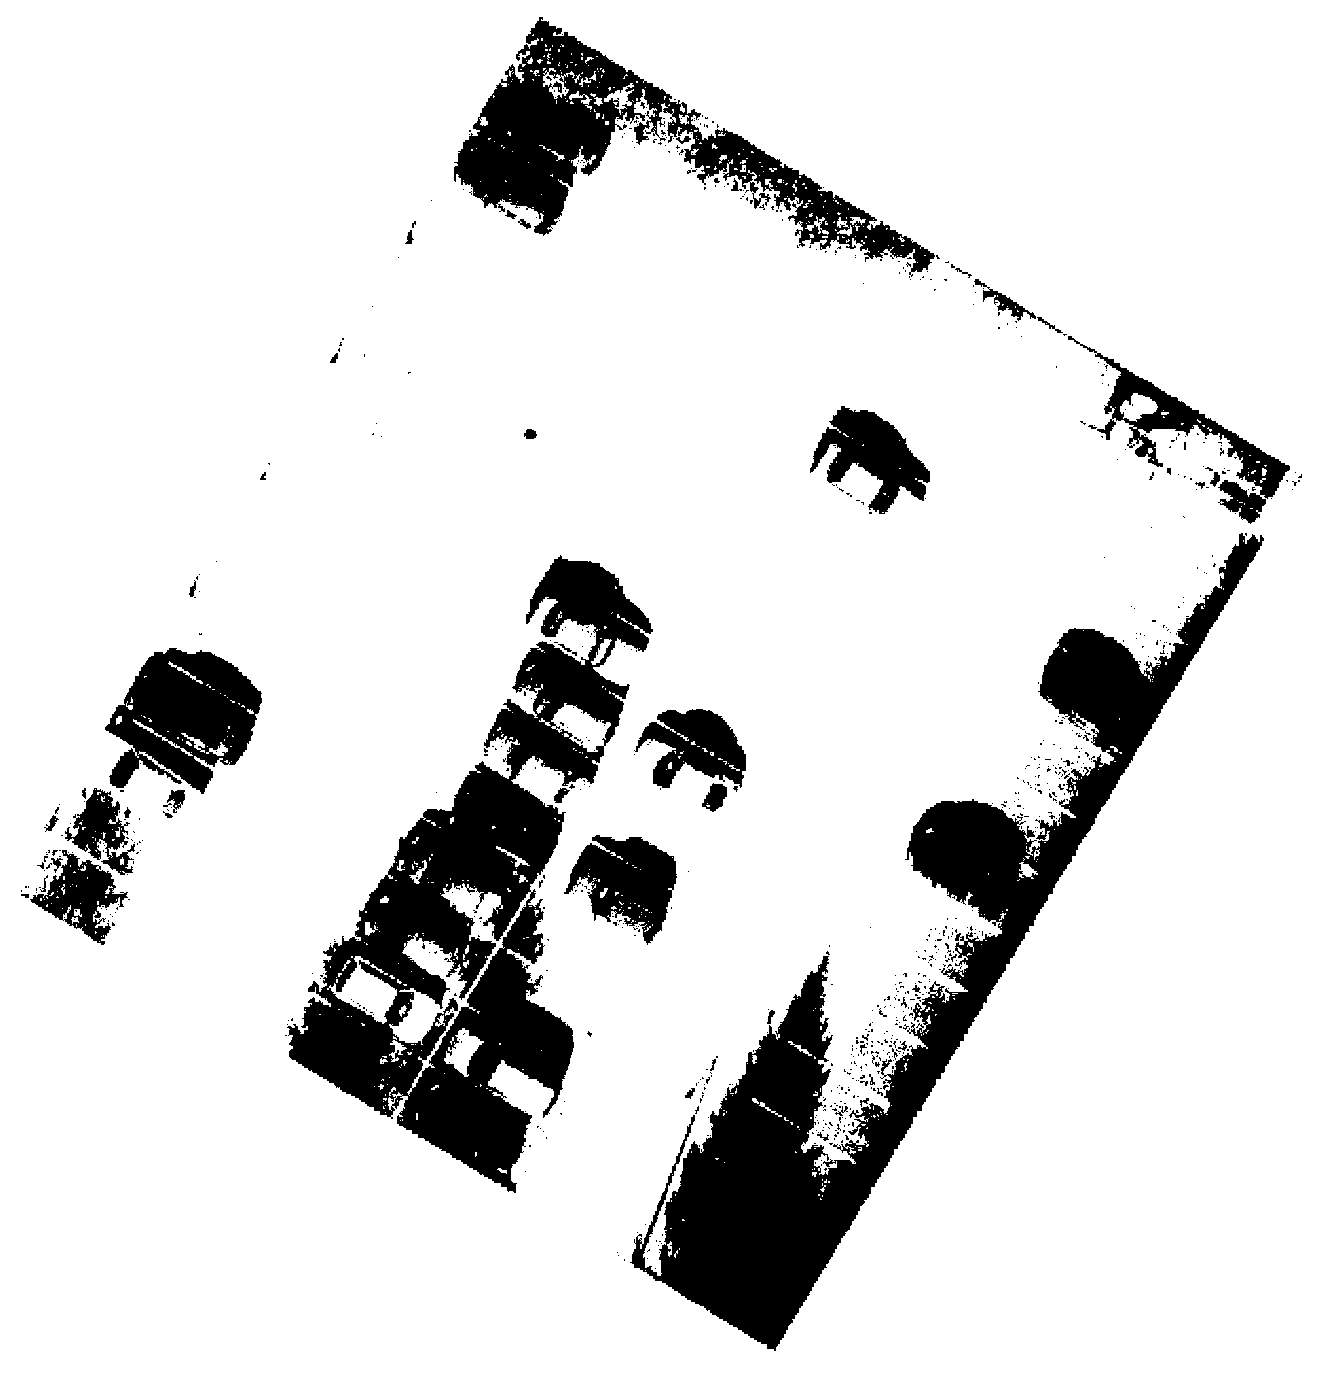 Park structure extraction method based on LiDAR data and ortho-images